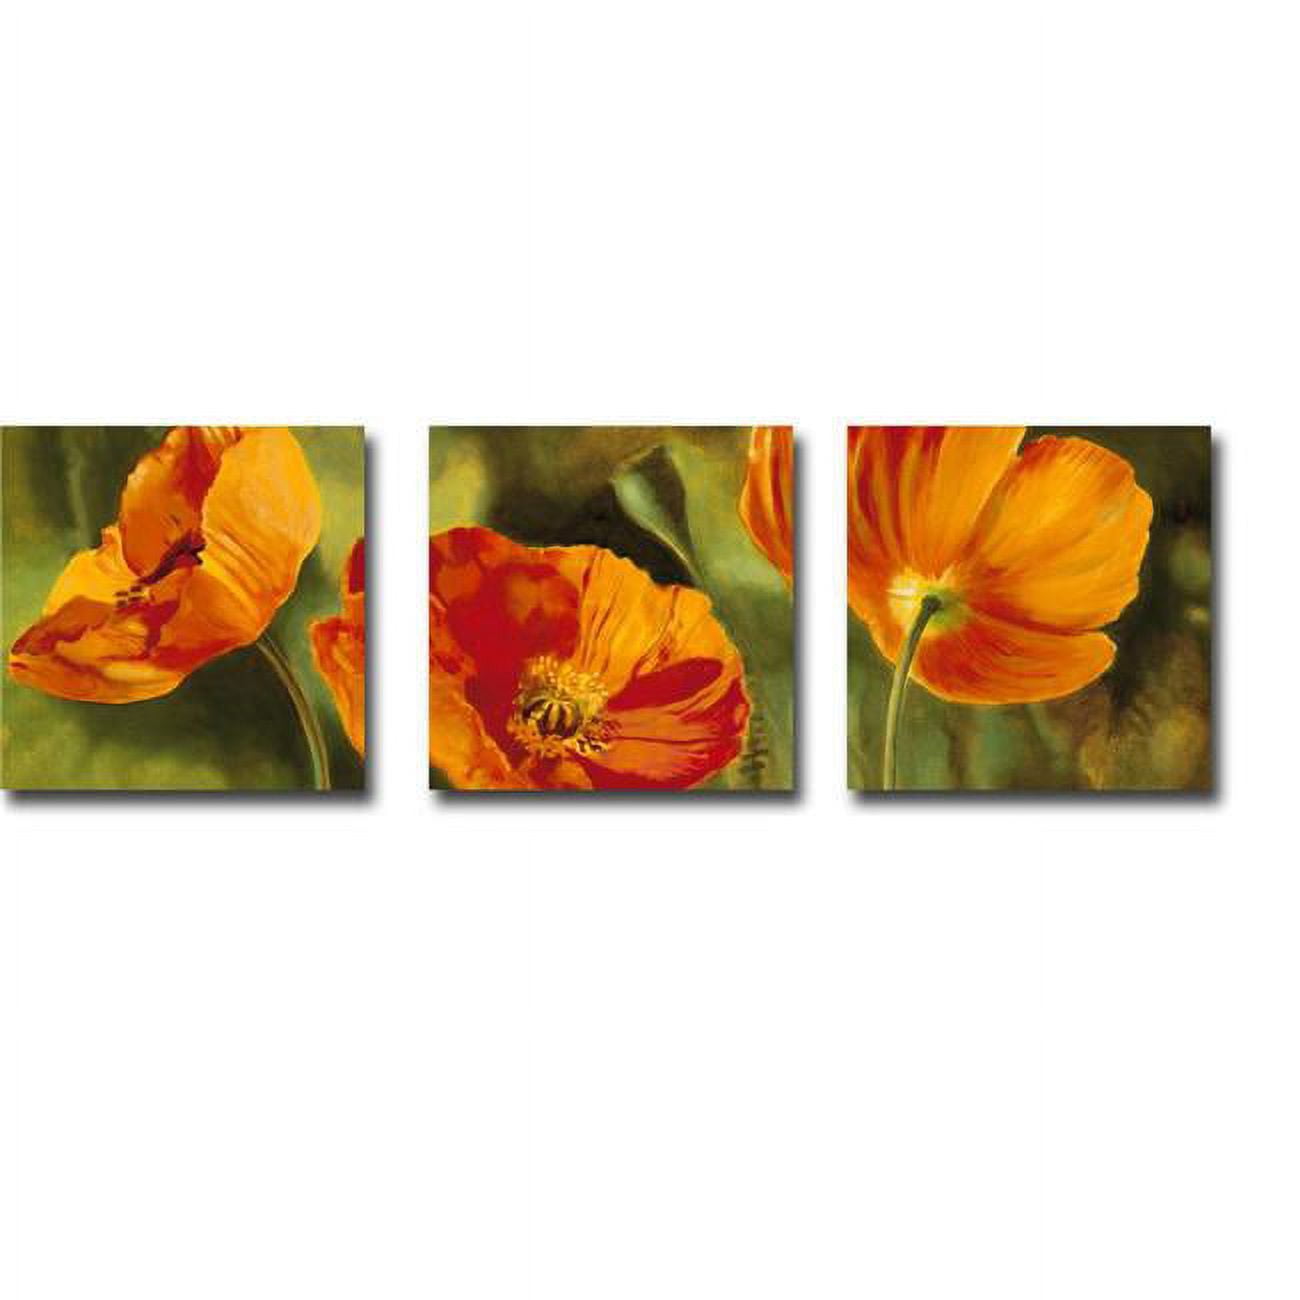 3636346tg Coquelicots Dans Le Soleil 1, 2, & 3 By Pierre Viollet 3 Piece Premium Oversize Gallery-wrapped Canvas Giclee Art Set - 36 X 36 In.